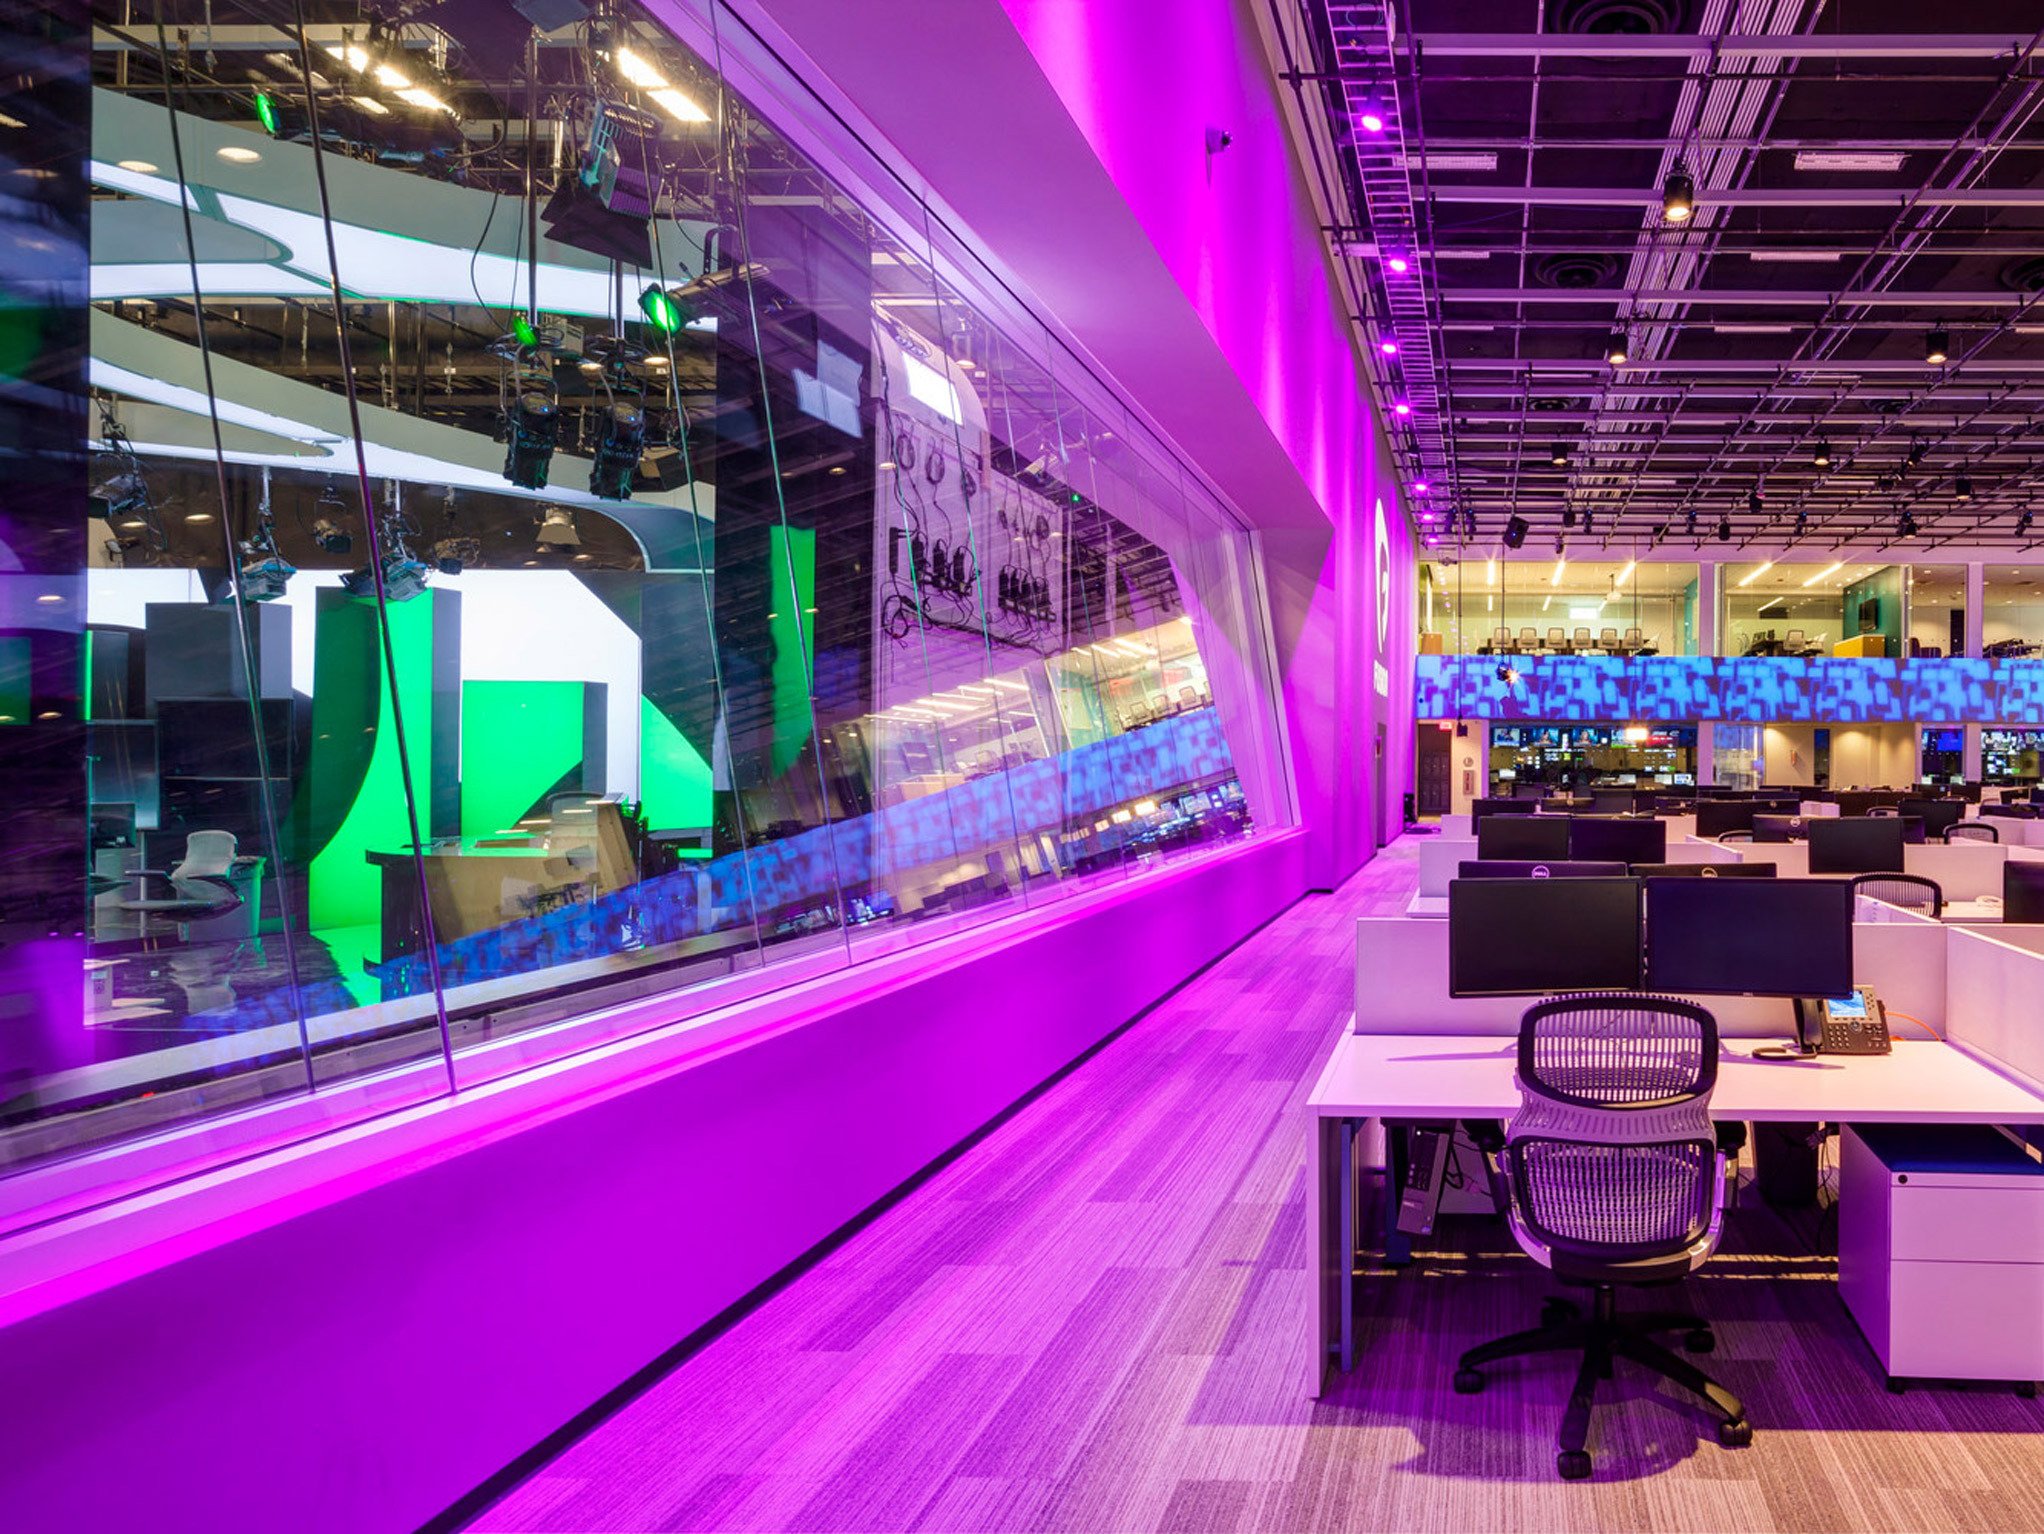 Modern open-plan office space with vibrant pink accent lighting along the windowed wall. It features sleek white desks, ergonomic black chairs, and modular overhead lighting grid. The environment is enhanced by a backdrop of dynamic multi-screen video installation.